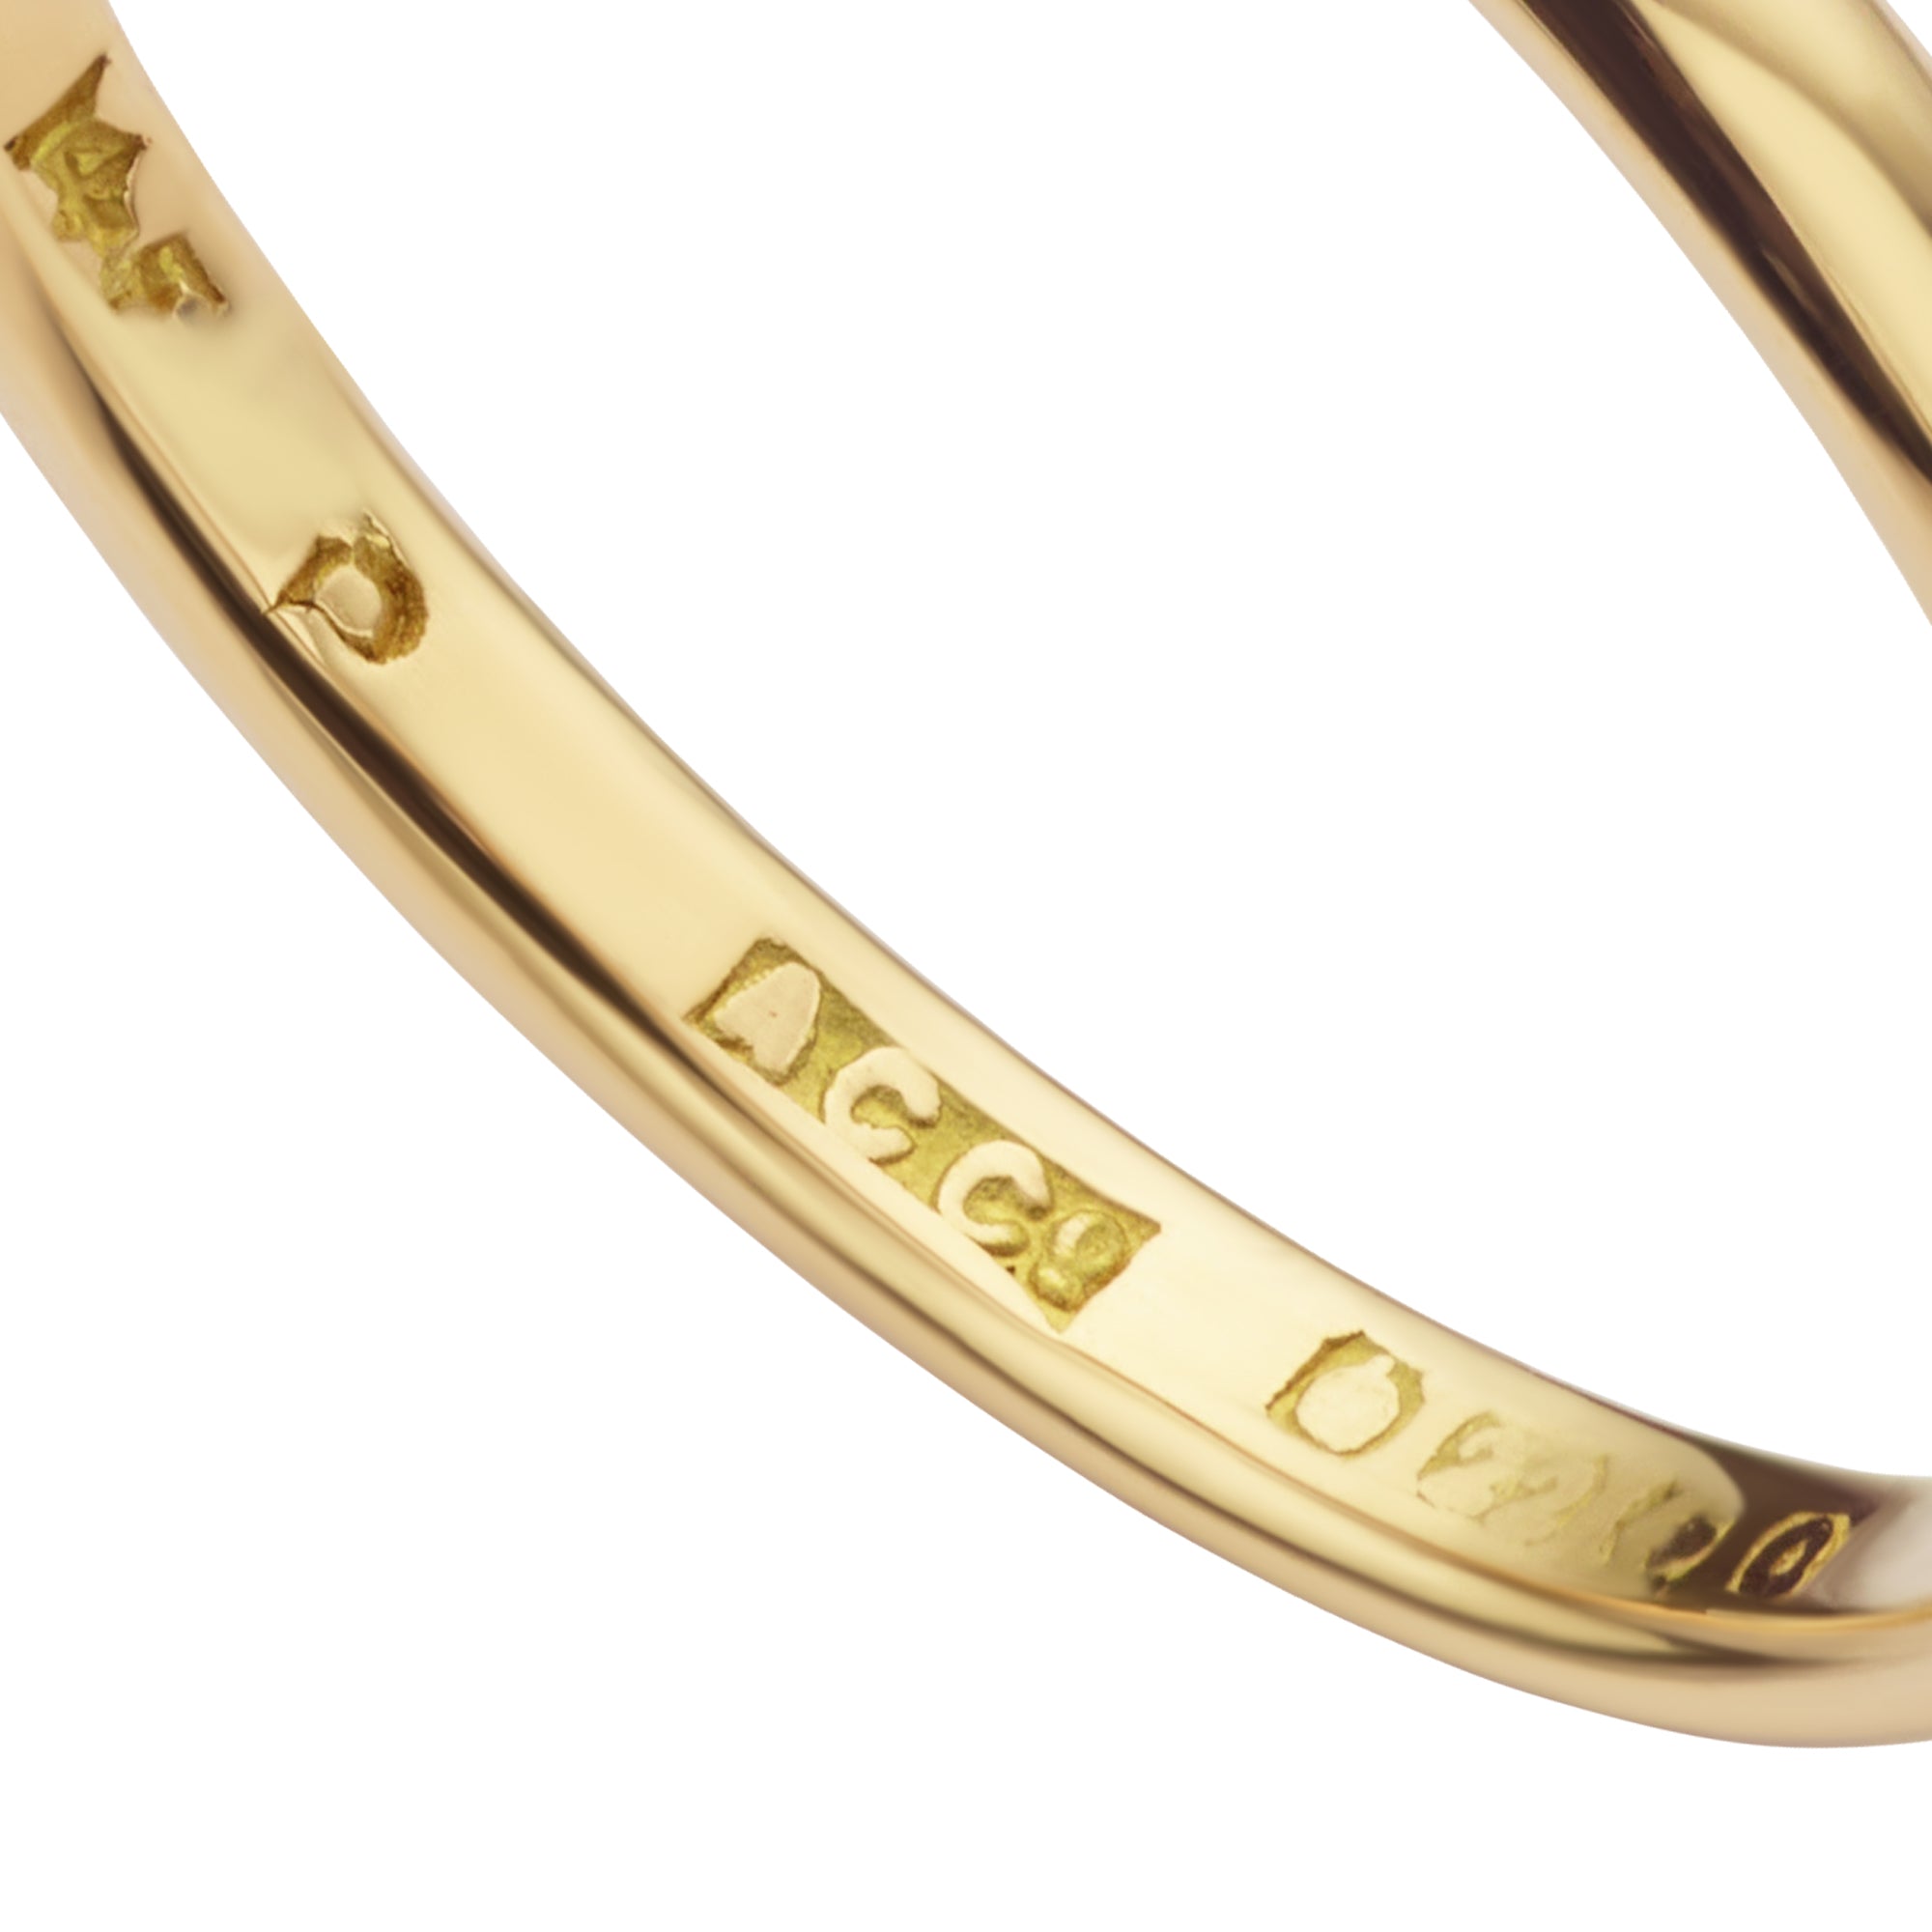 Close up view of the 22ct gold hallmark on the pre-loved-wedding-ring